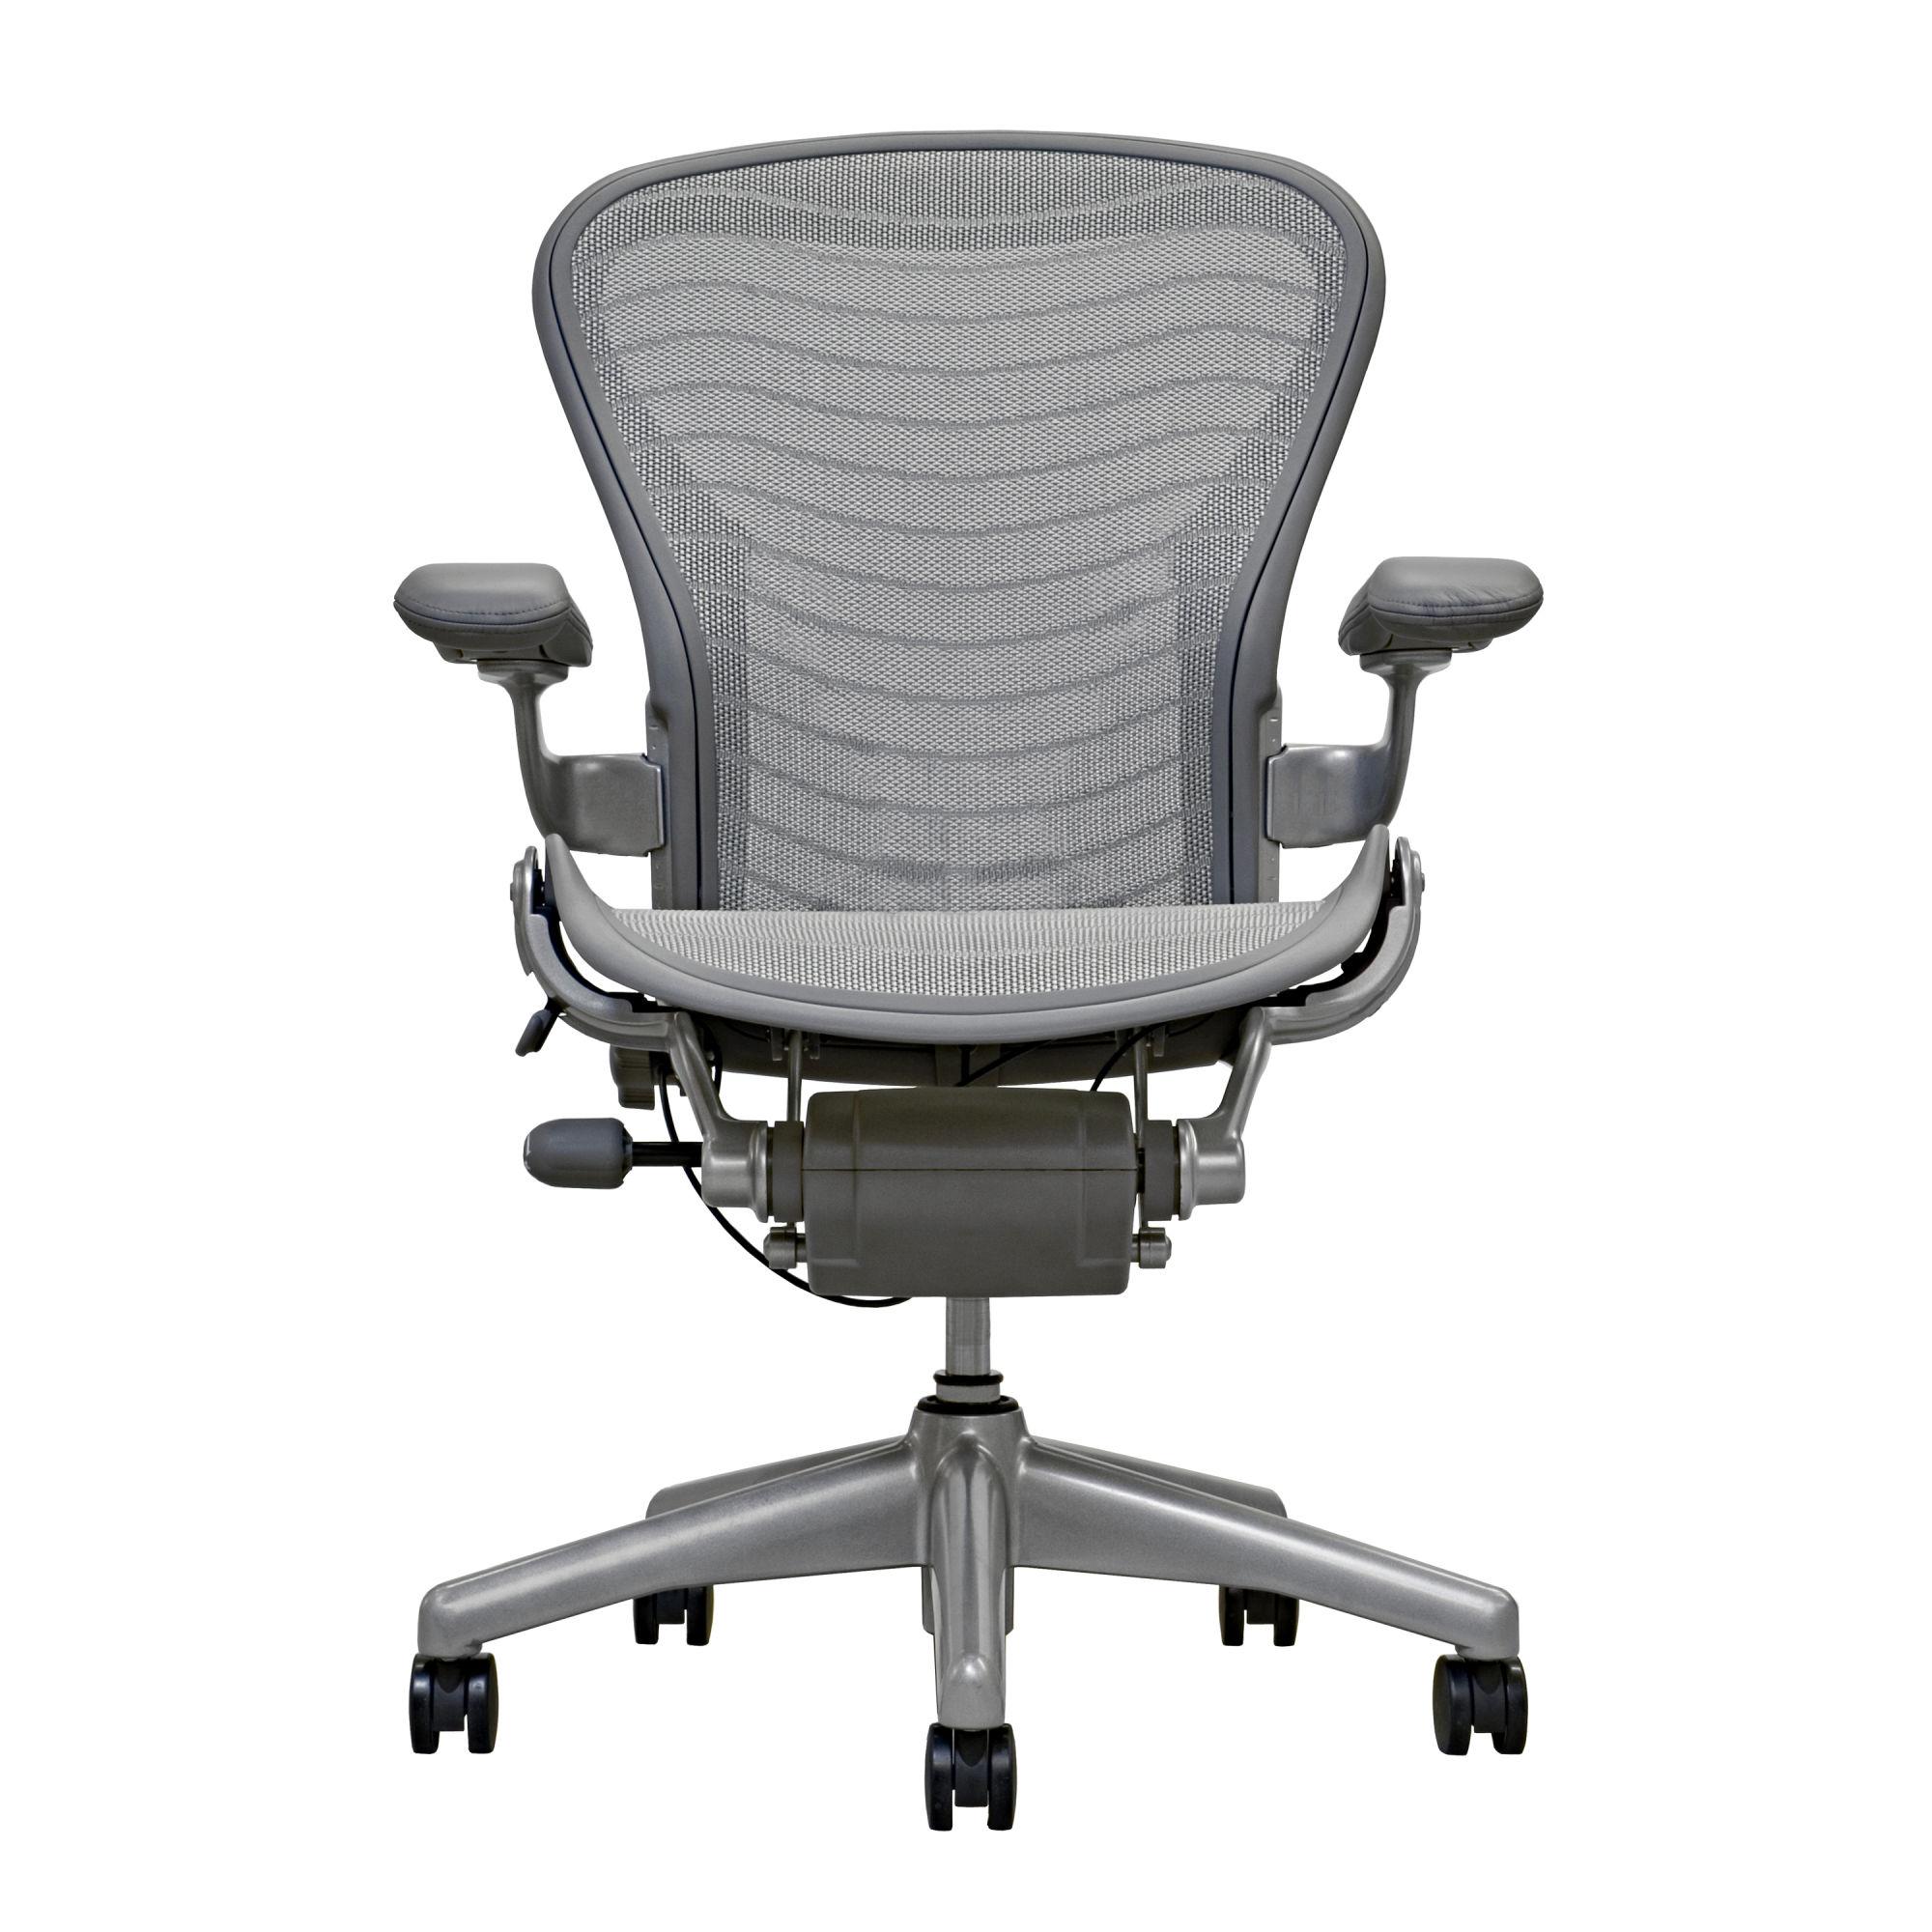 Creatice Most Comfortable Office Chair Australia for Living room